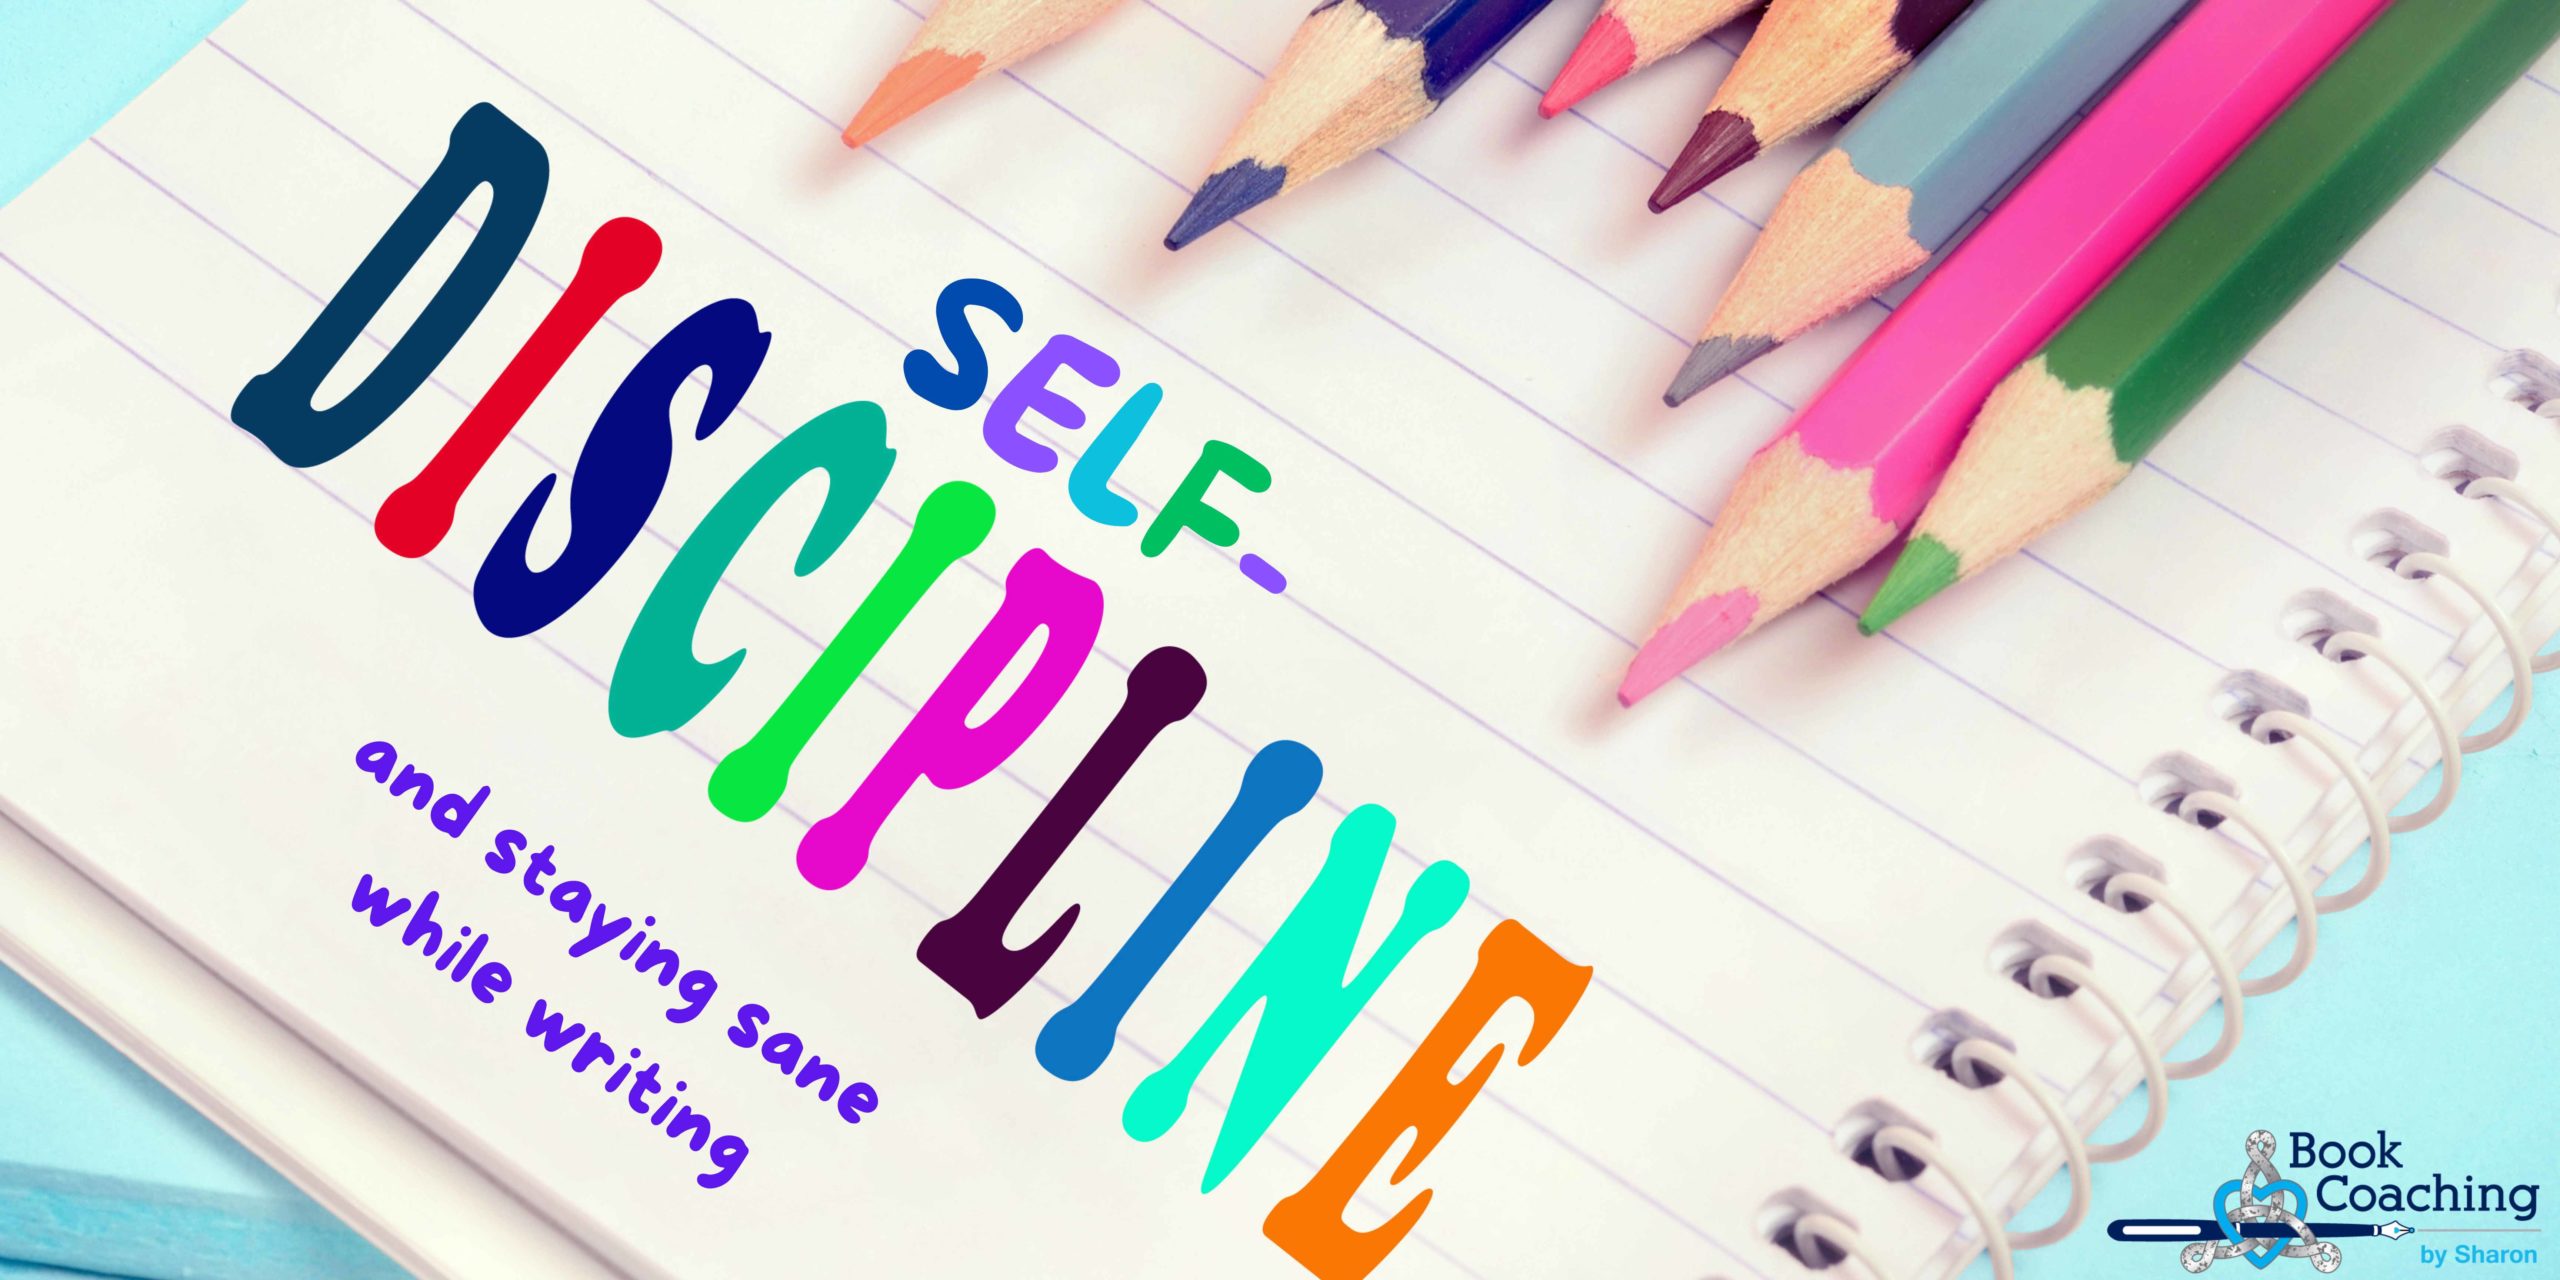 Blog header image: Colored pencils arrayed on a lined white pad with colorful text that reads Self-Discipline and staying sane while writing.